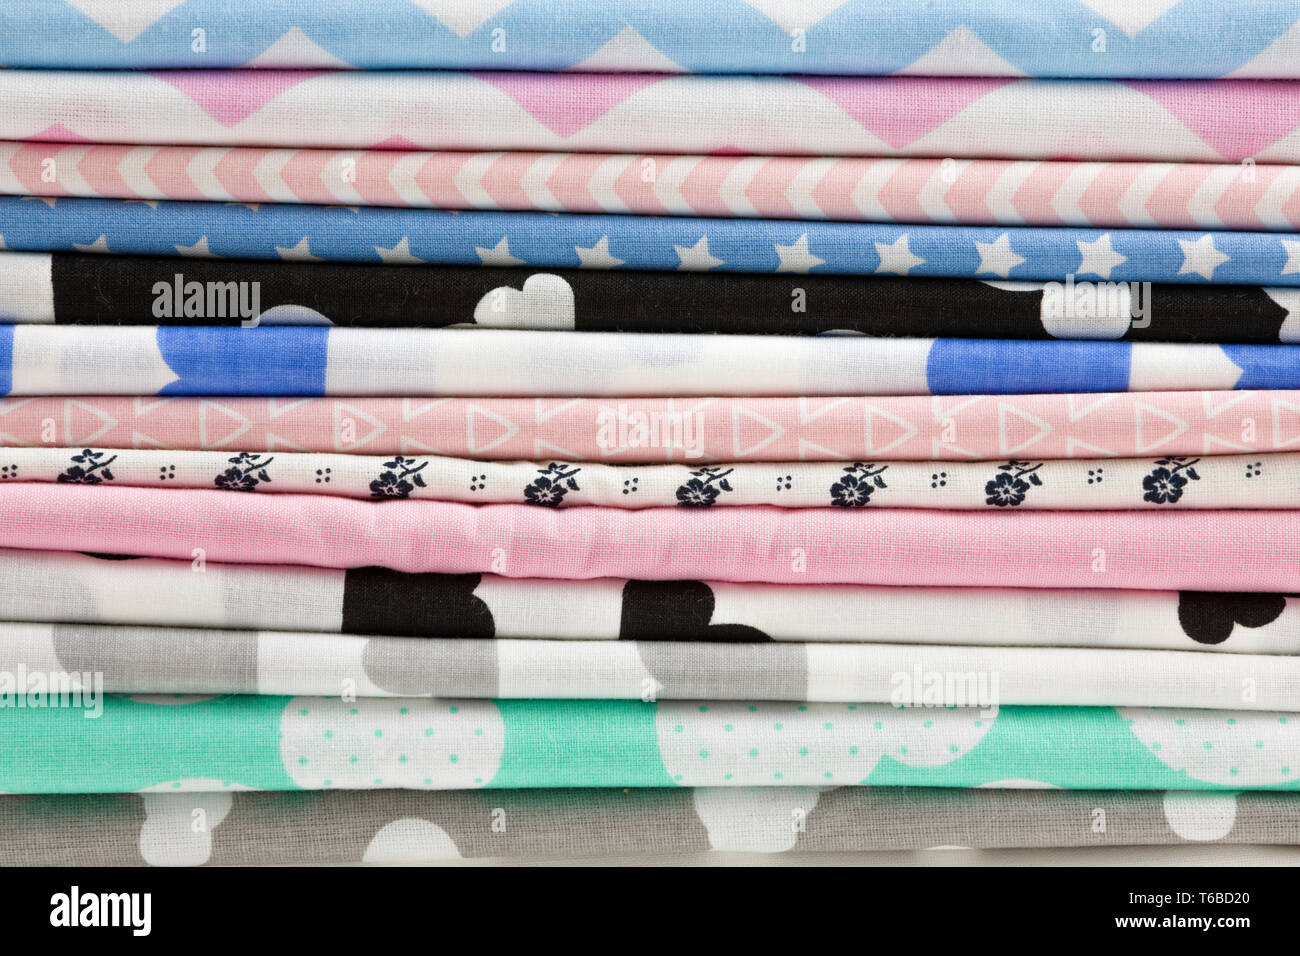 Stack of cotton fabric material background Stock Photo